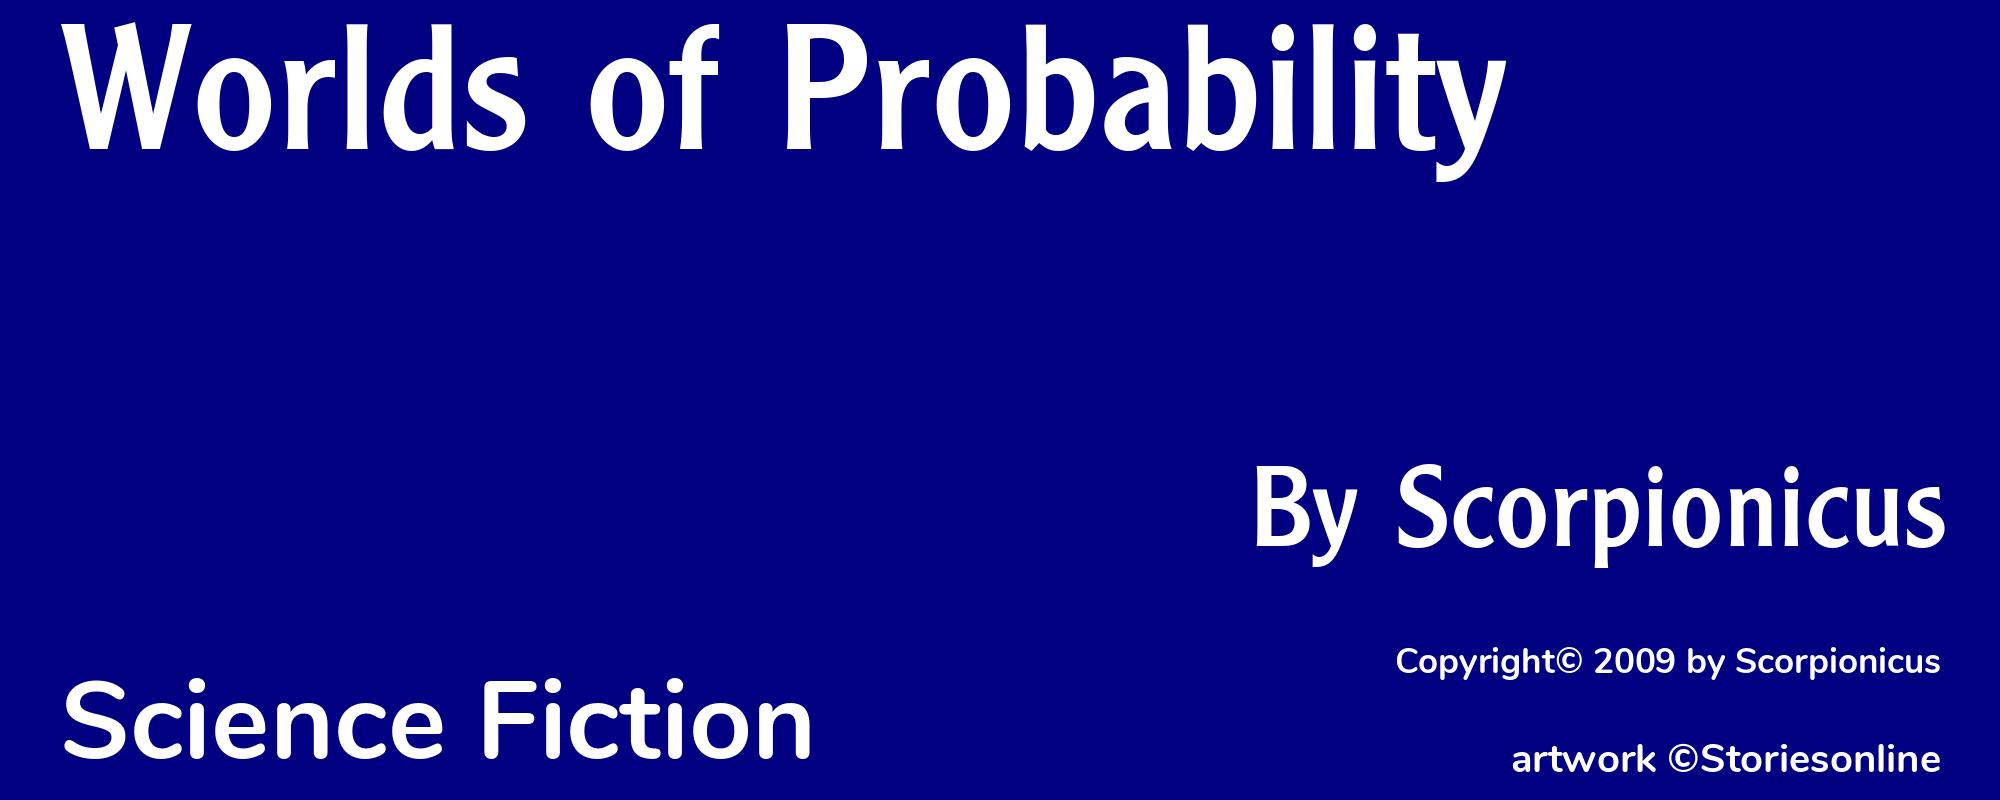 Worlds of Probability - Cover